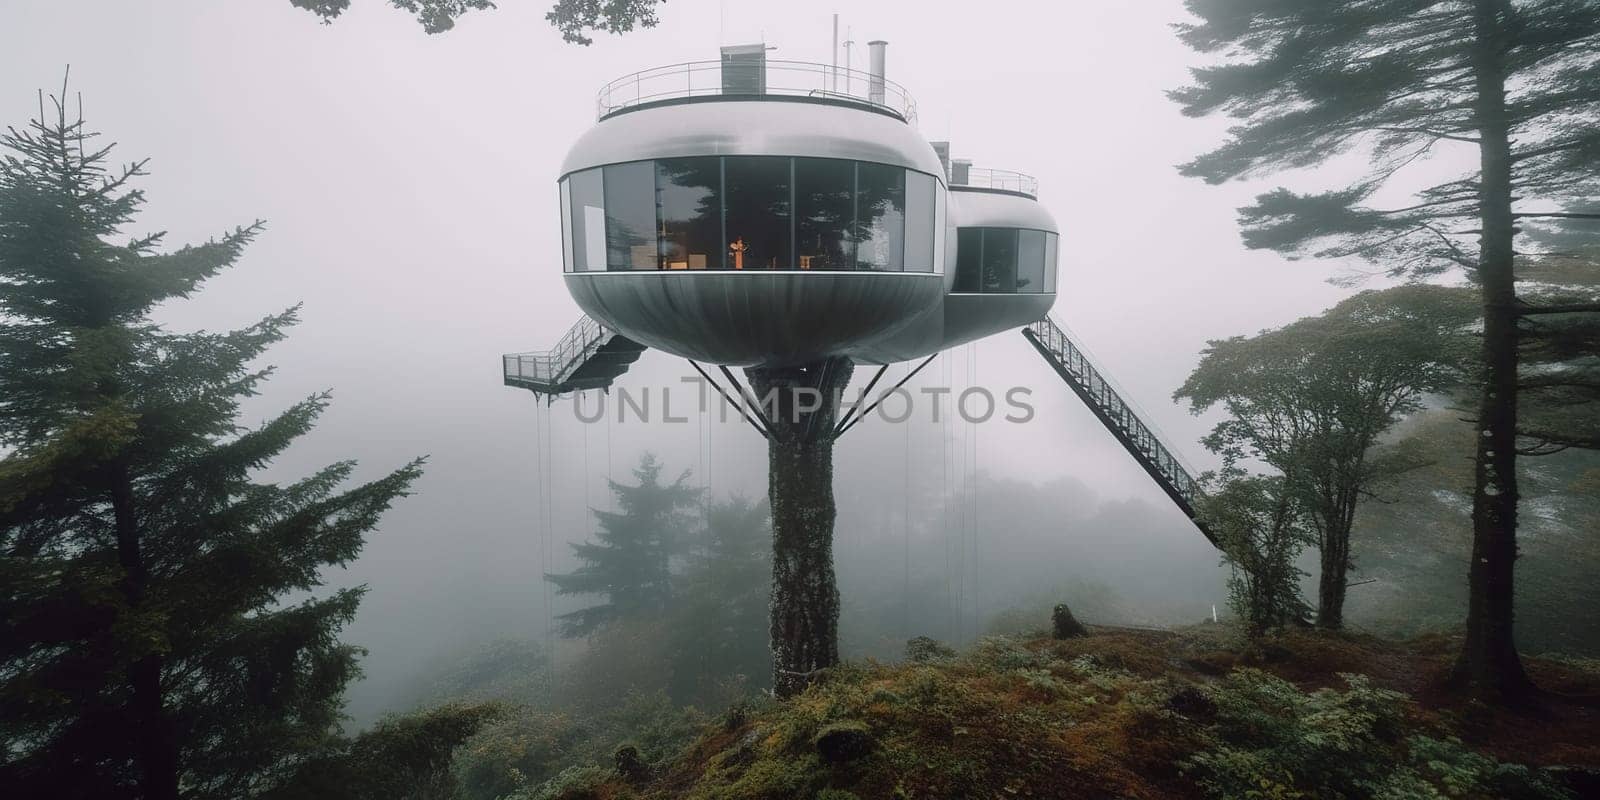 Futuristic Houses in a Misty Forest by tan4ikk1